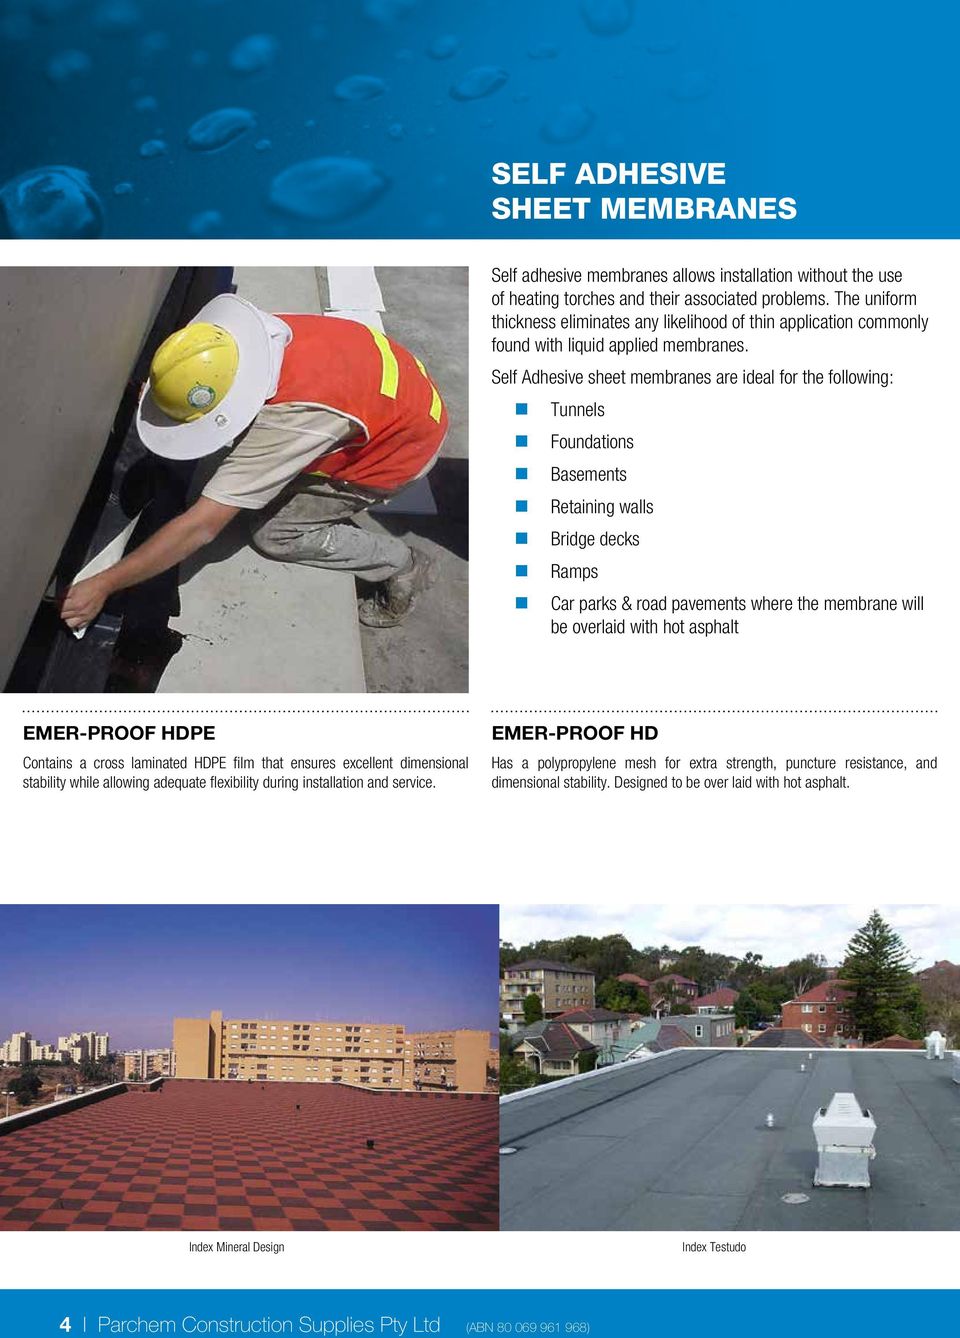 Self Adhesive sheet membranes are ideal for the following: Tunnels Foundations Basements Retaining walls Bridge decks Ramps Car parks & road pavements where the membrane will be overlaid with hot